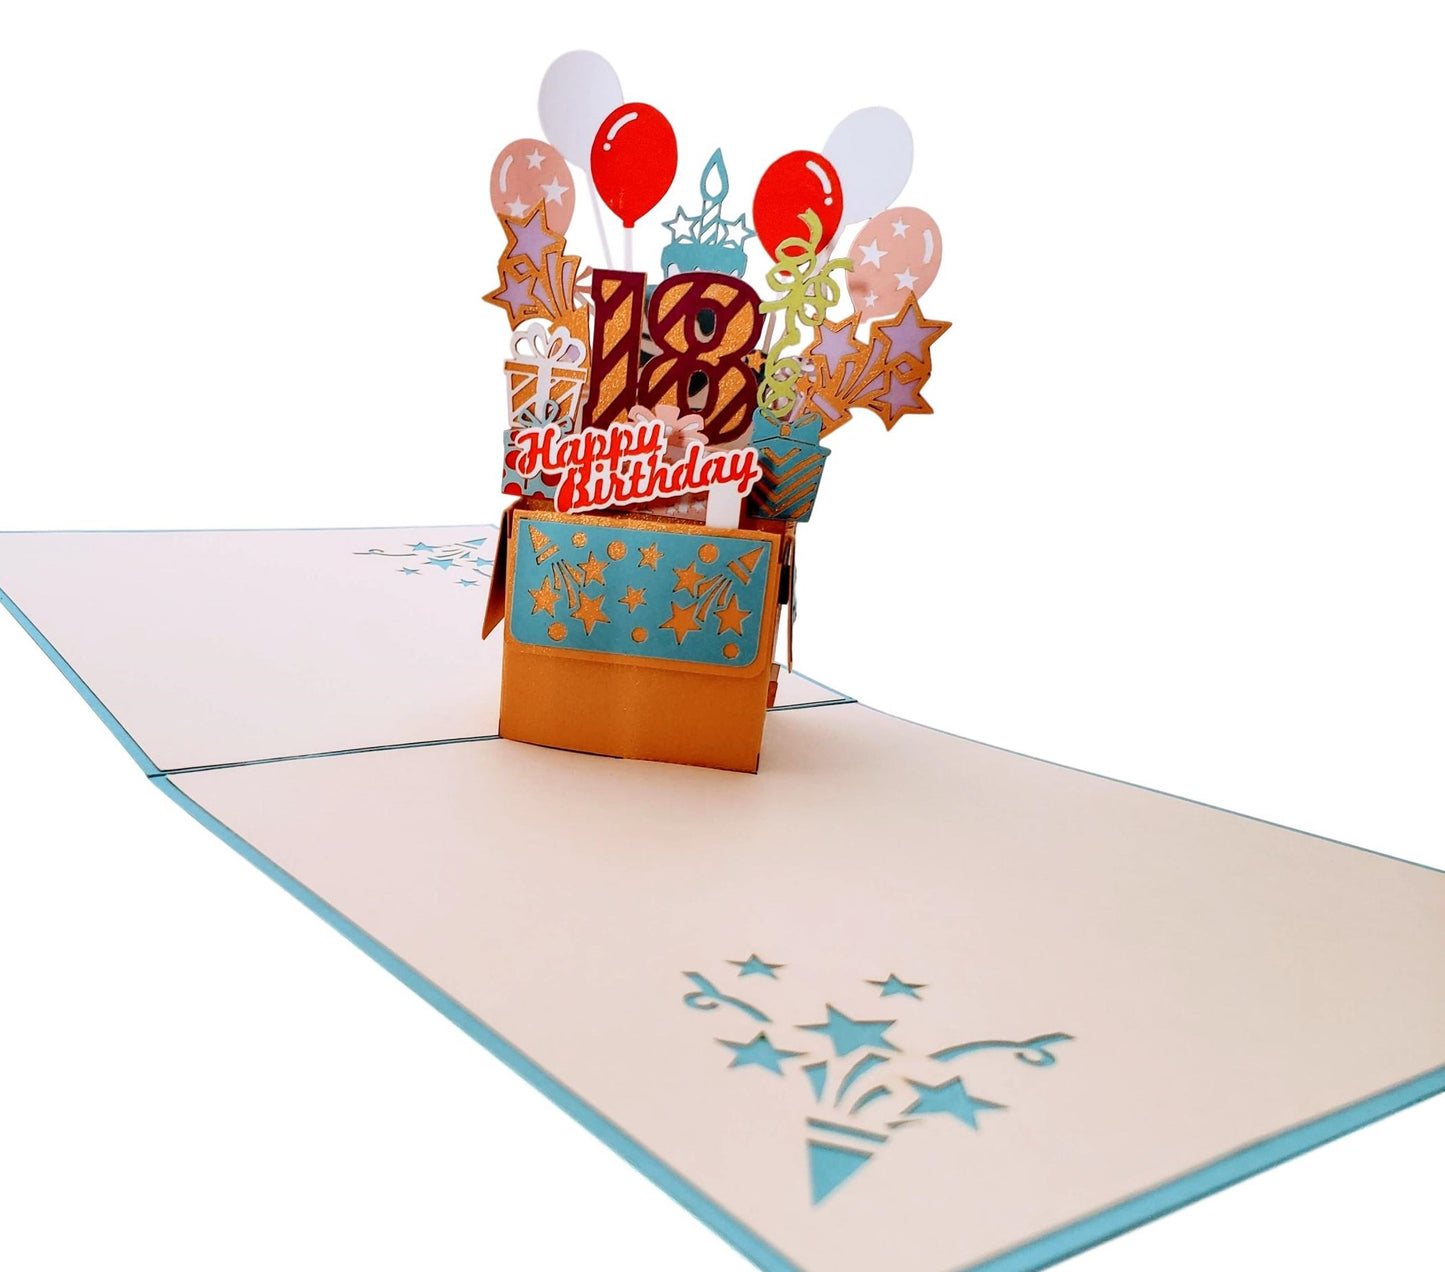 Happy 18th Birthday Blue Party Box 3D Pop Up Greeting Card - 18th birthday card - 18th birthday wish - iGifts And Cards